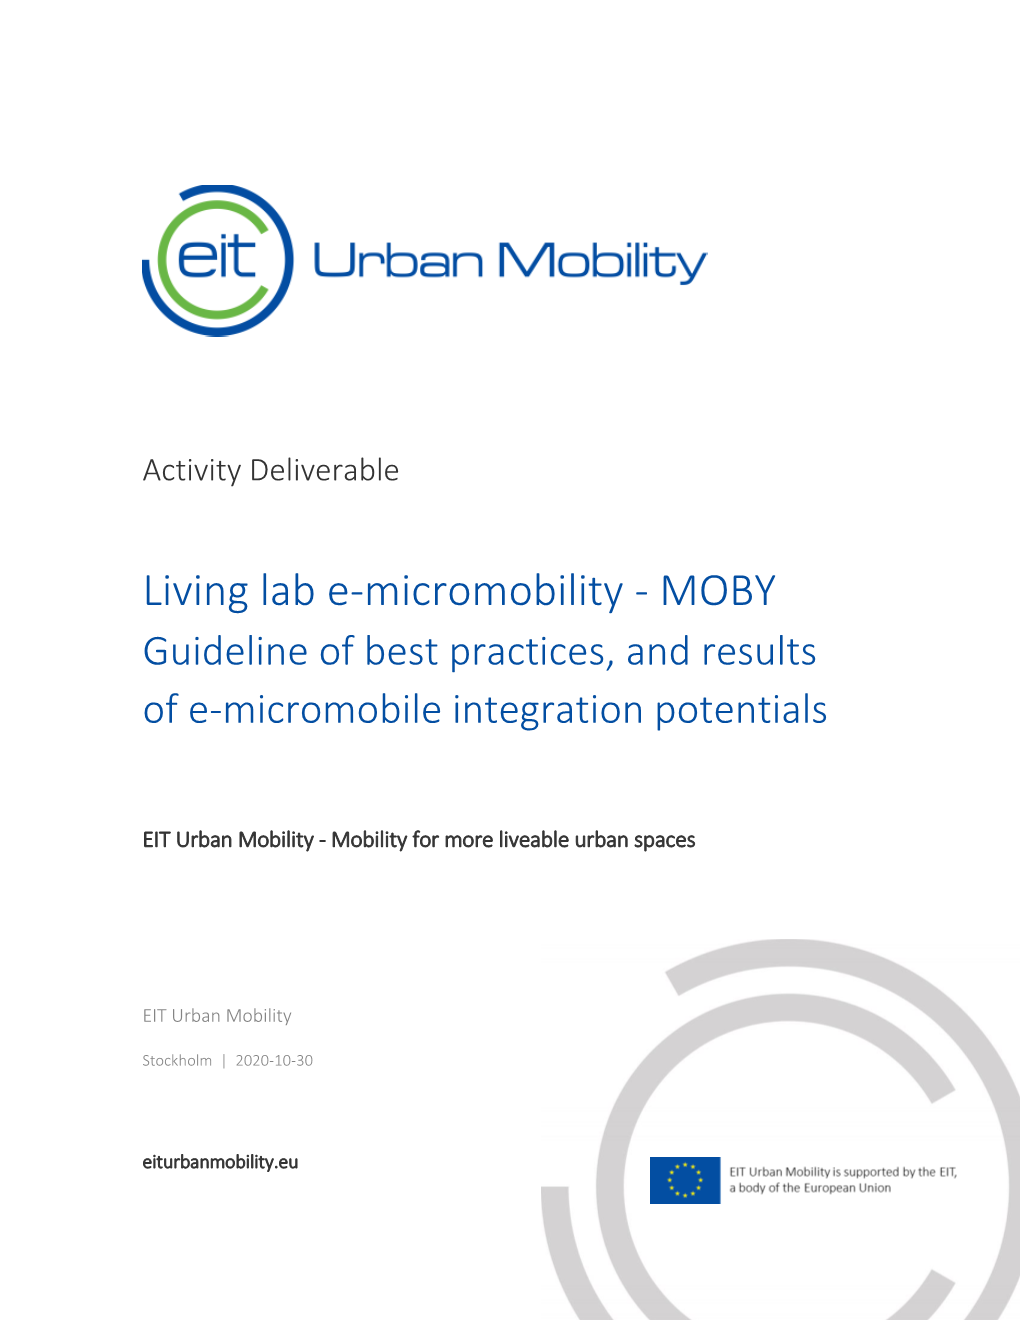 Living Lab E-Micromobility – MOBY Guideline of Best Practices, and Results of E-Micromobile Integration Potentials